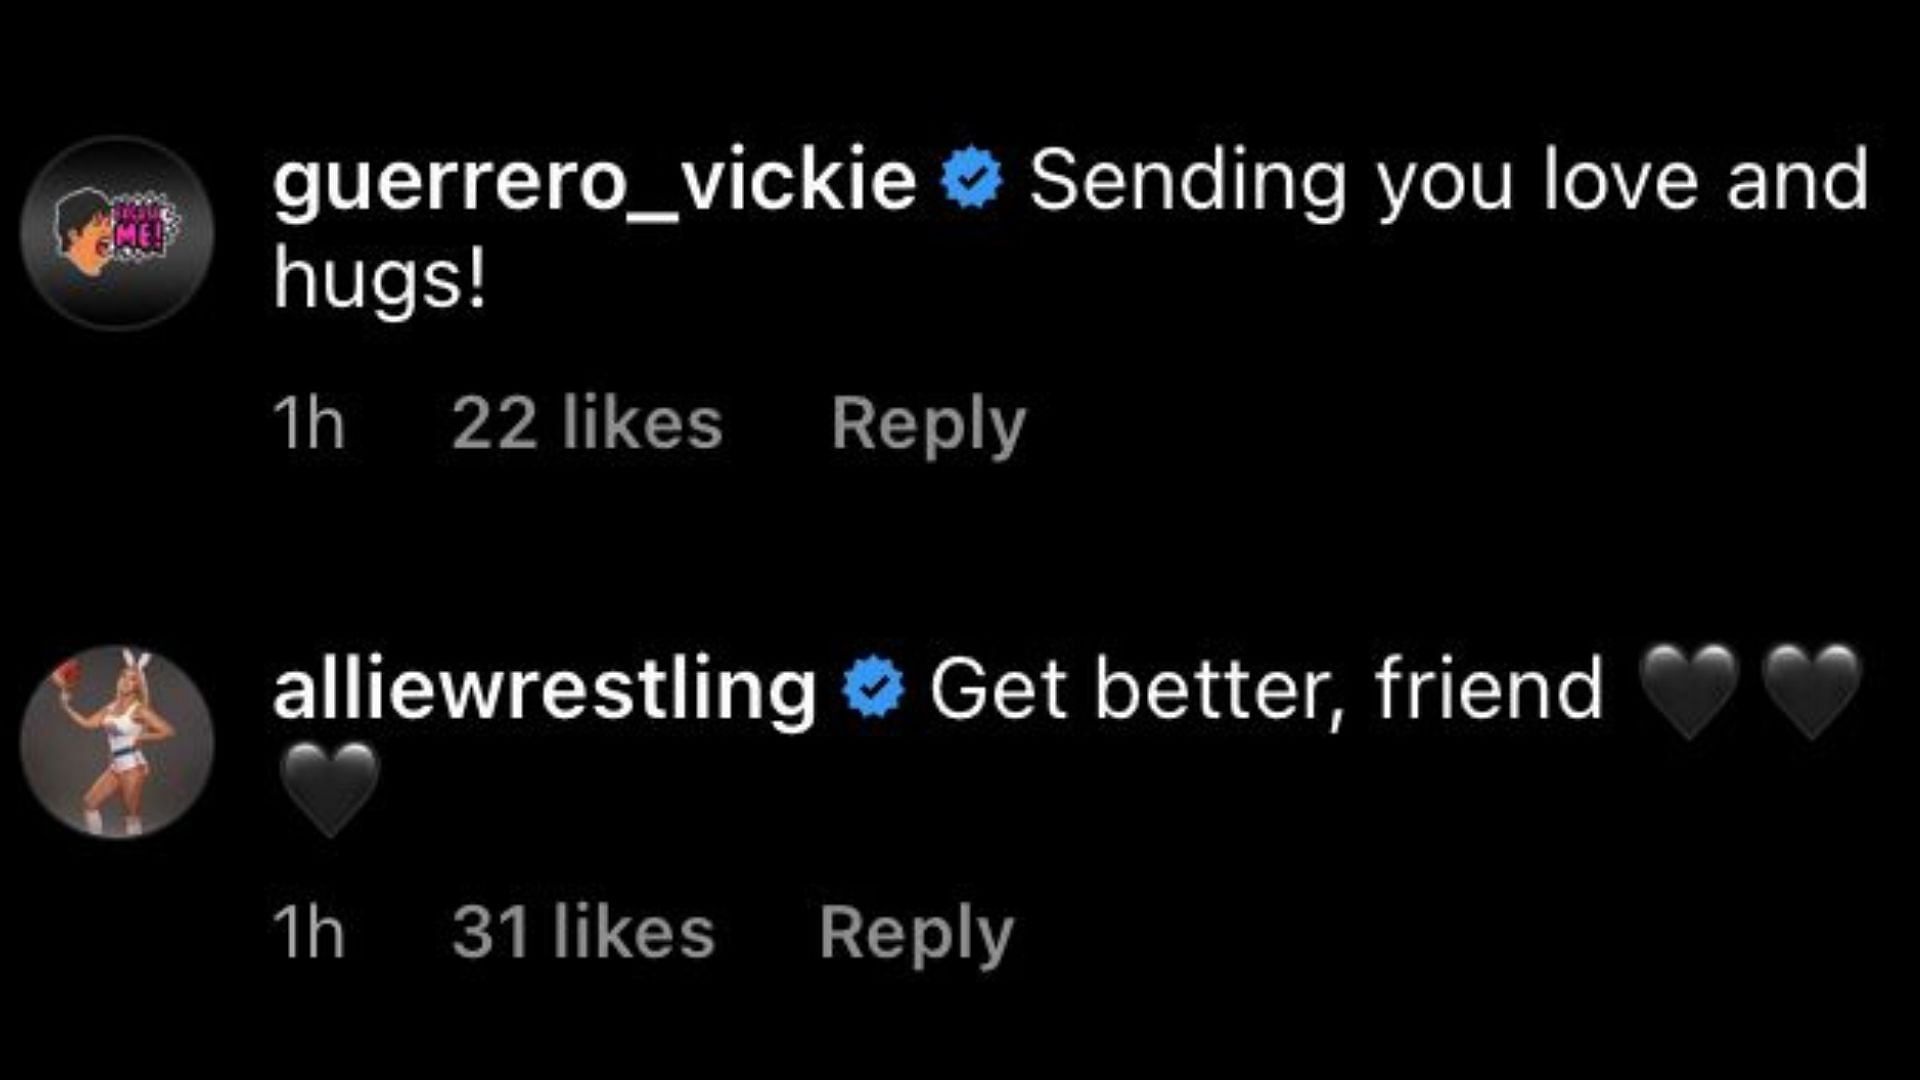 Vickie Guerrero and The Bunny sending their love via Instagram